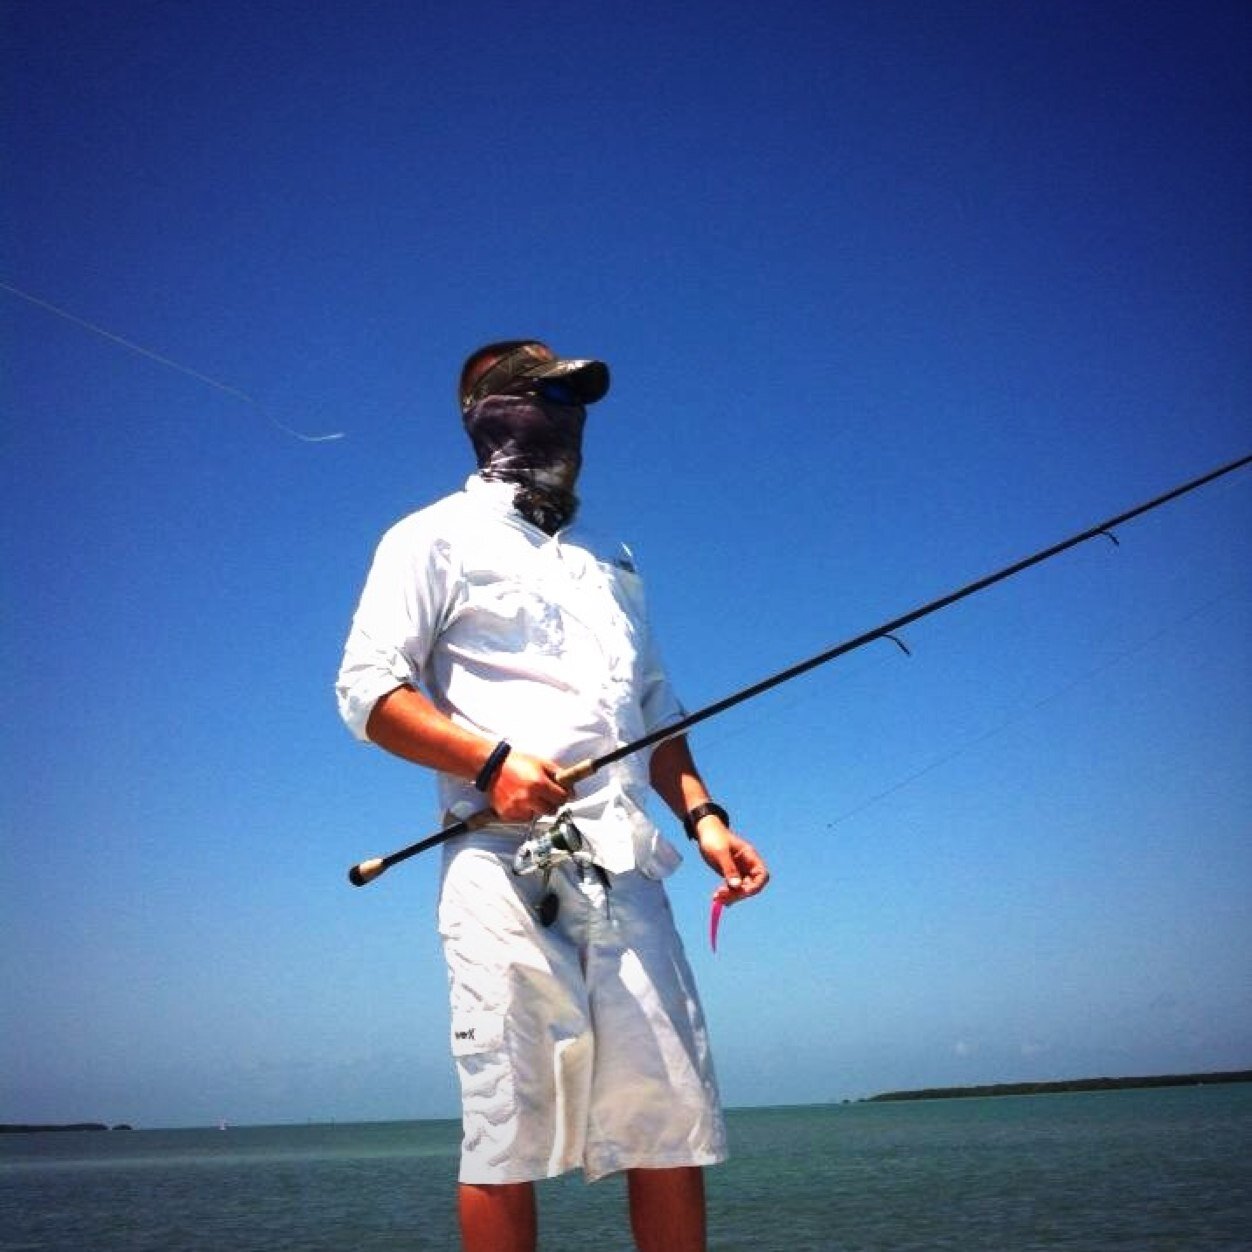 Husband, Father, and Lawman. Florida Born and Bred. Tournament Circuit Fishing Capt. on the side.